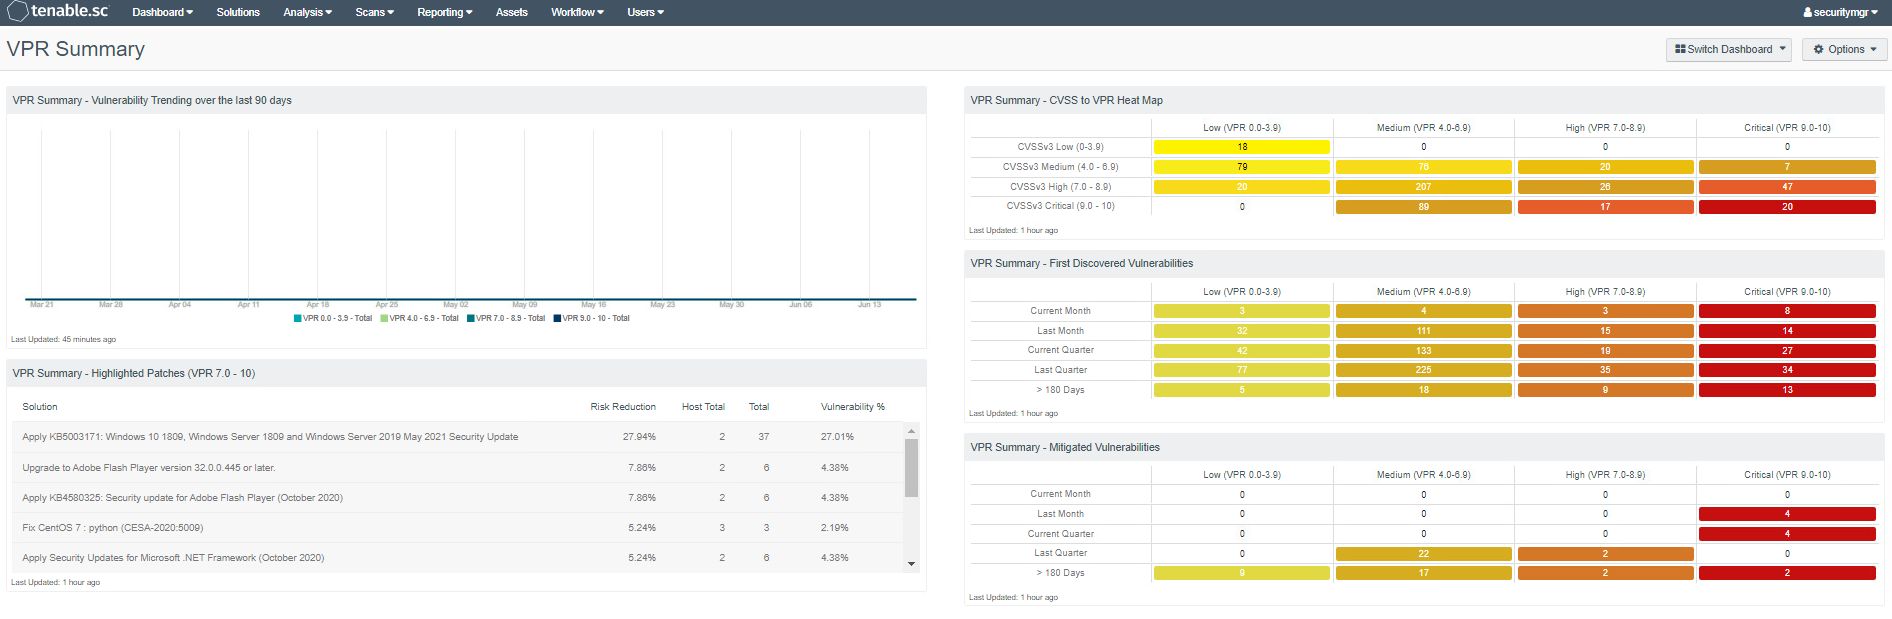 This is a screenshot of the Tenable.sc VPR Summary dashboard.